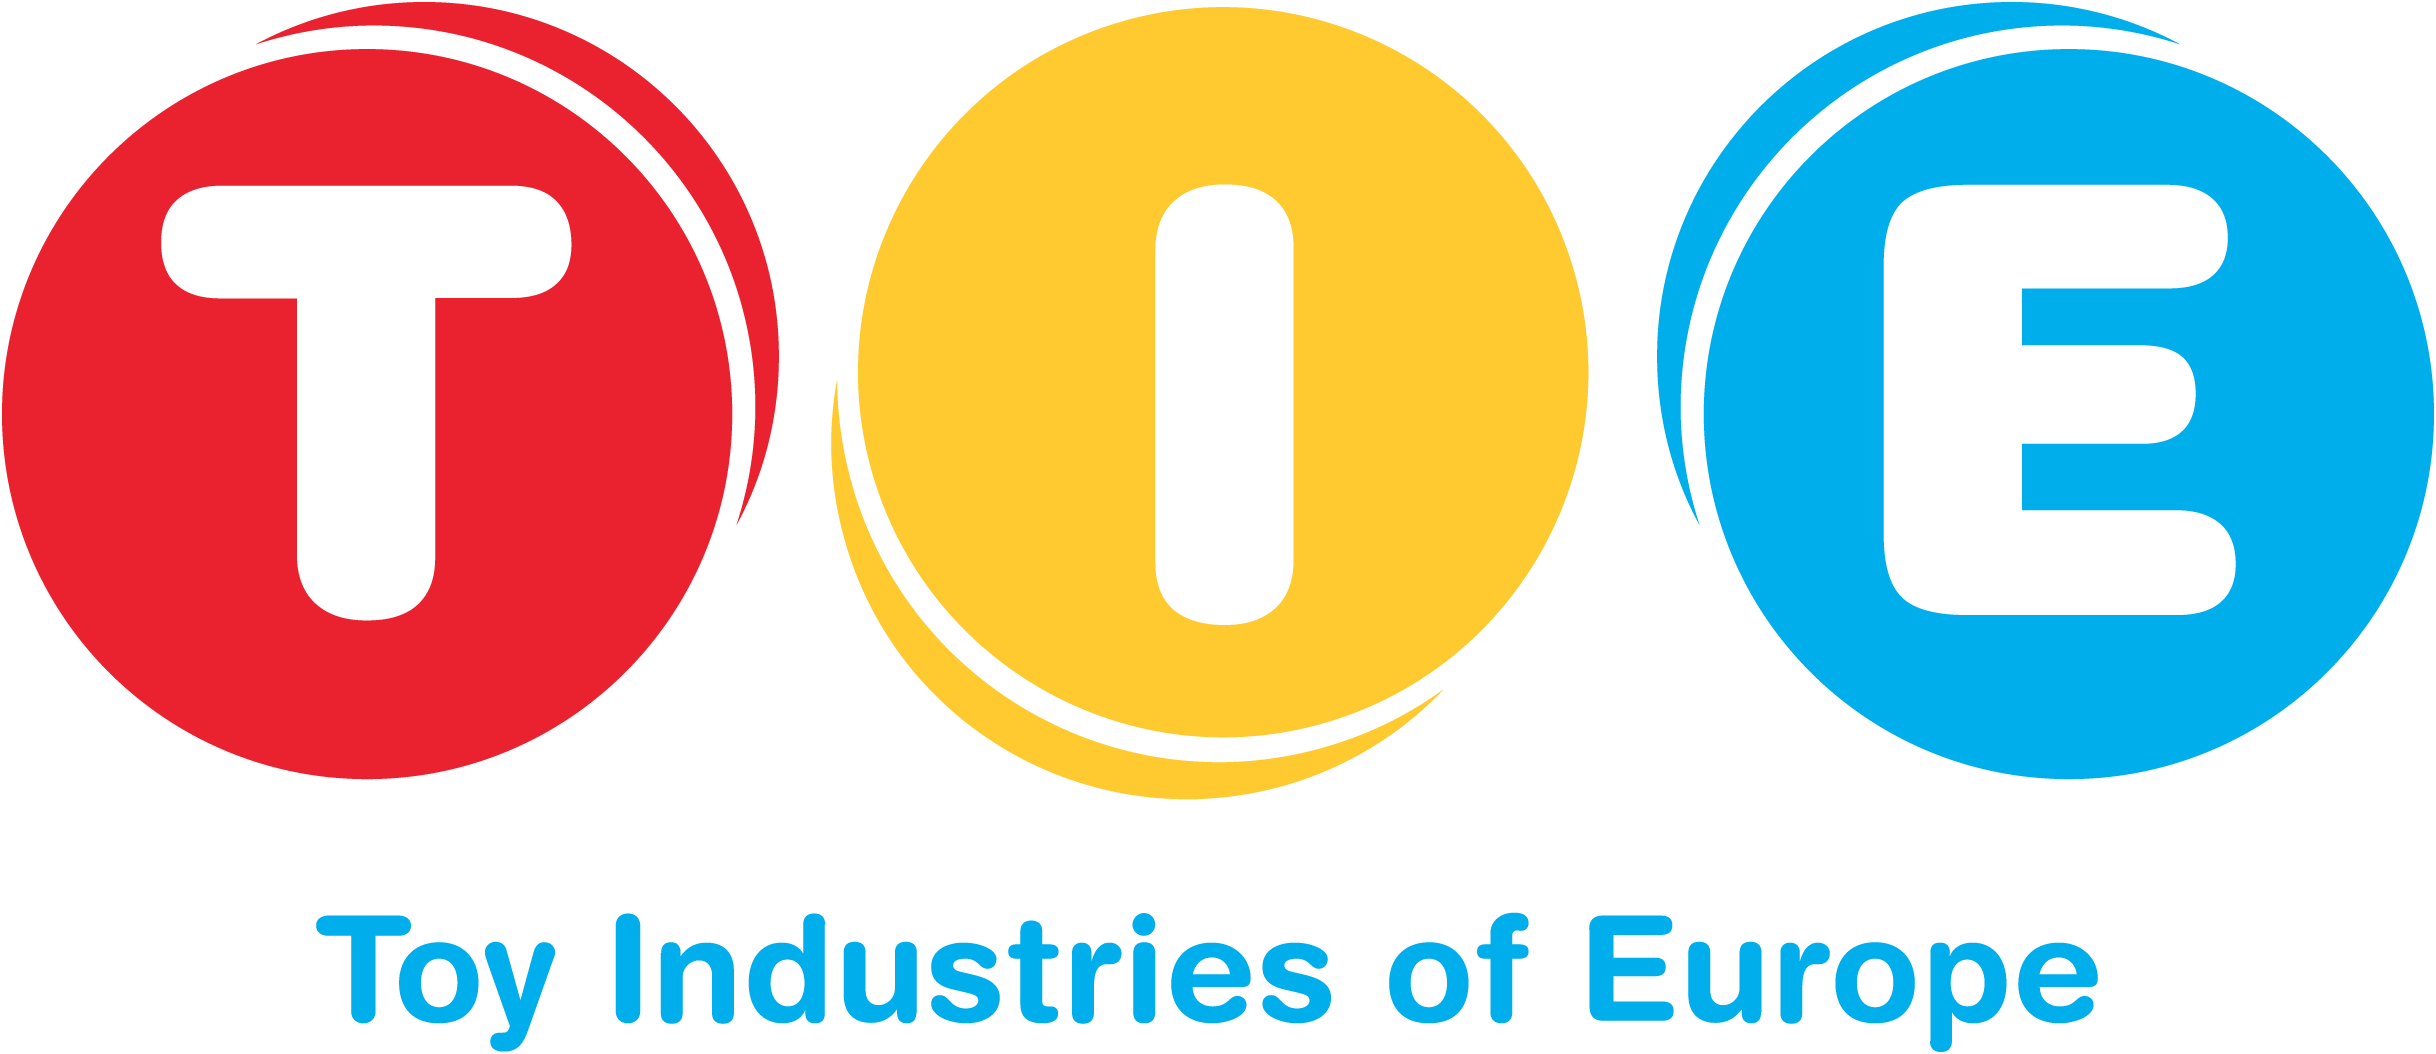 Toy Industries of Europe